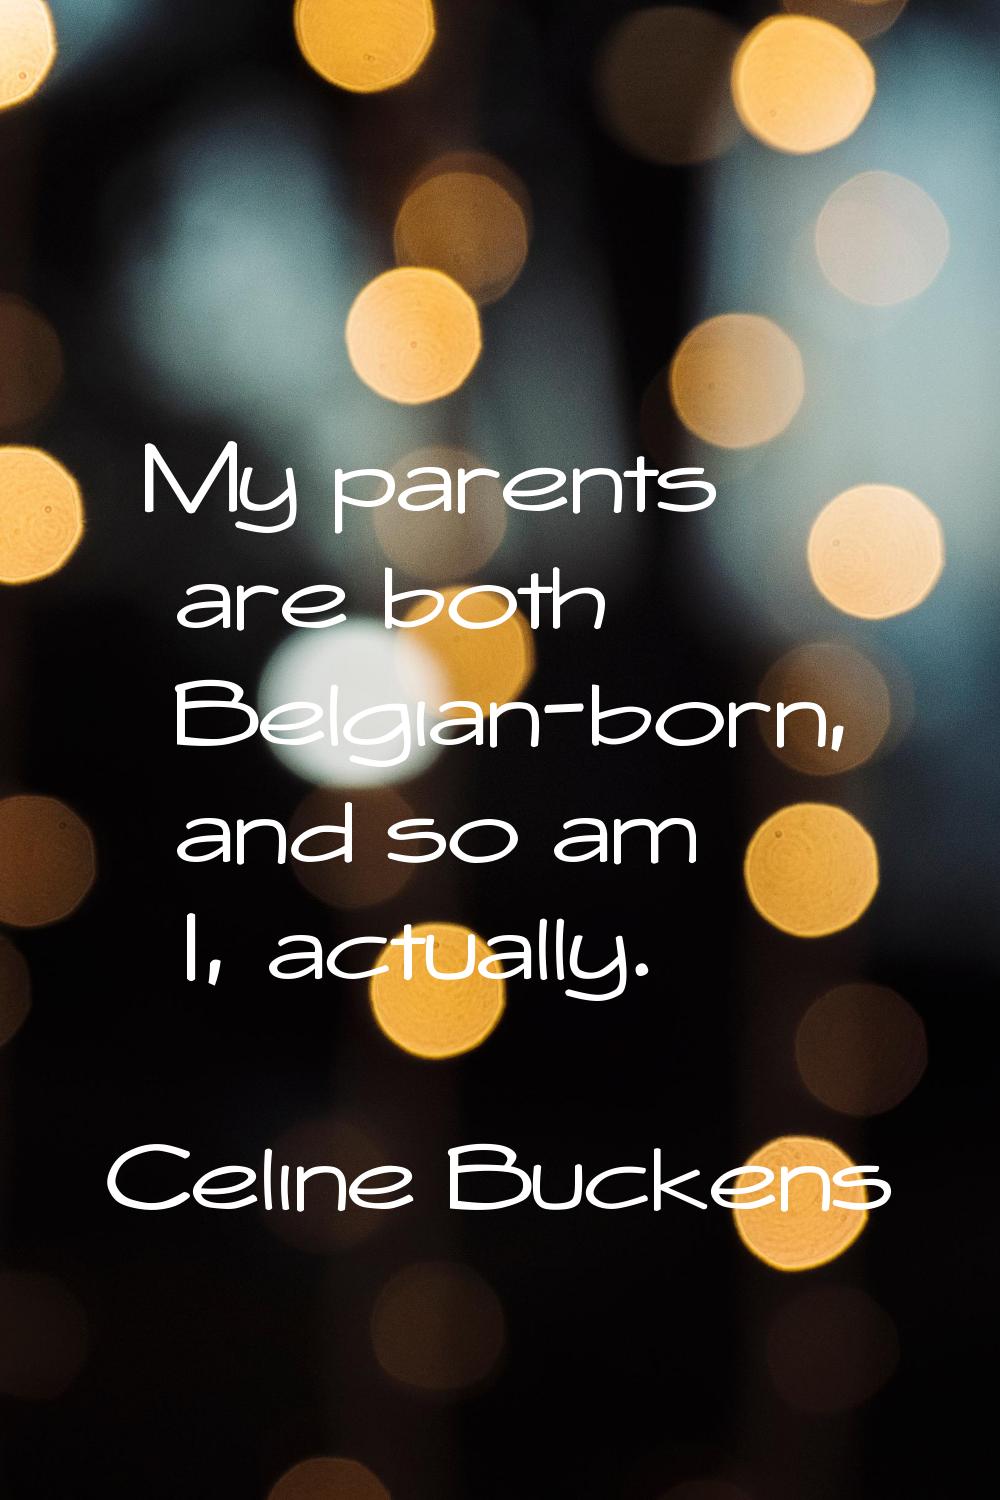 My parents are both Belgian-born, and so am I, actually.